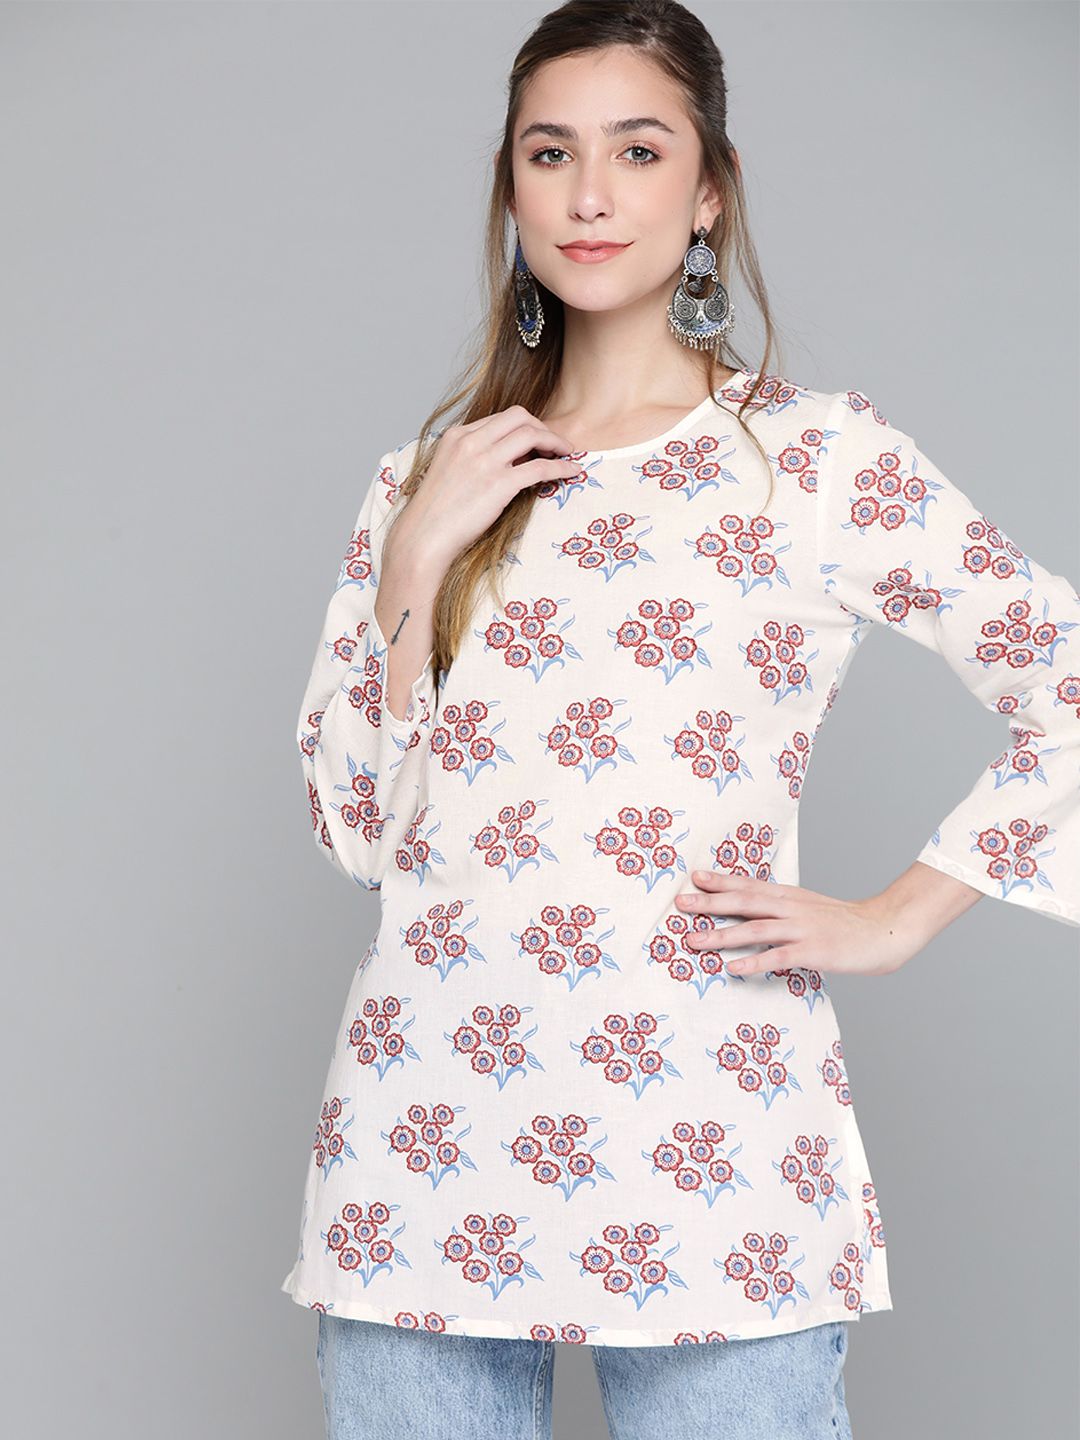 HERE&NOW White & Pink Ethnic Motifs Printed Pure Cotton Kurti Price in India